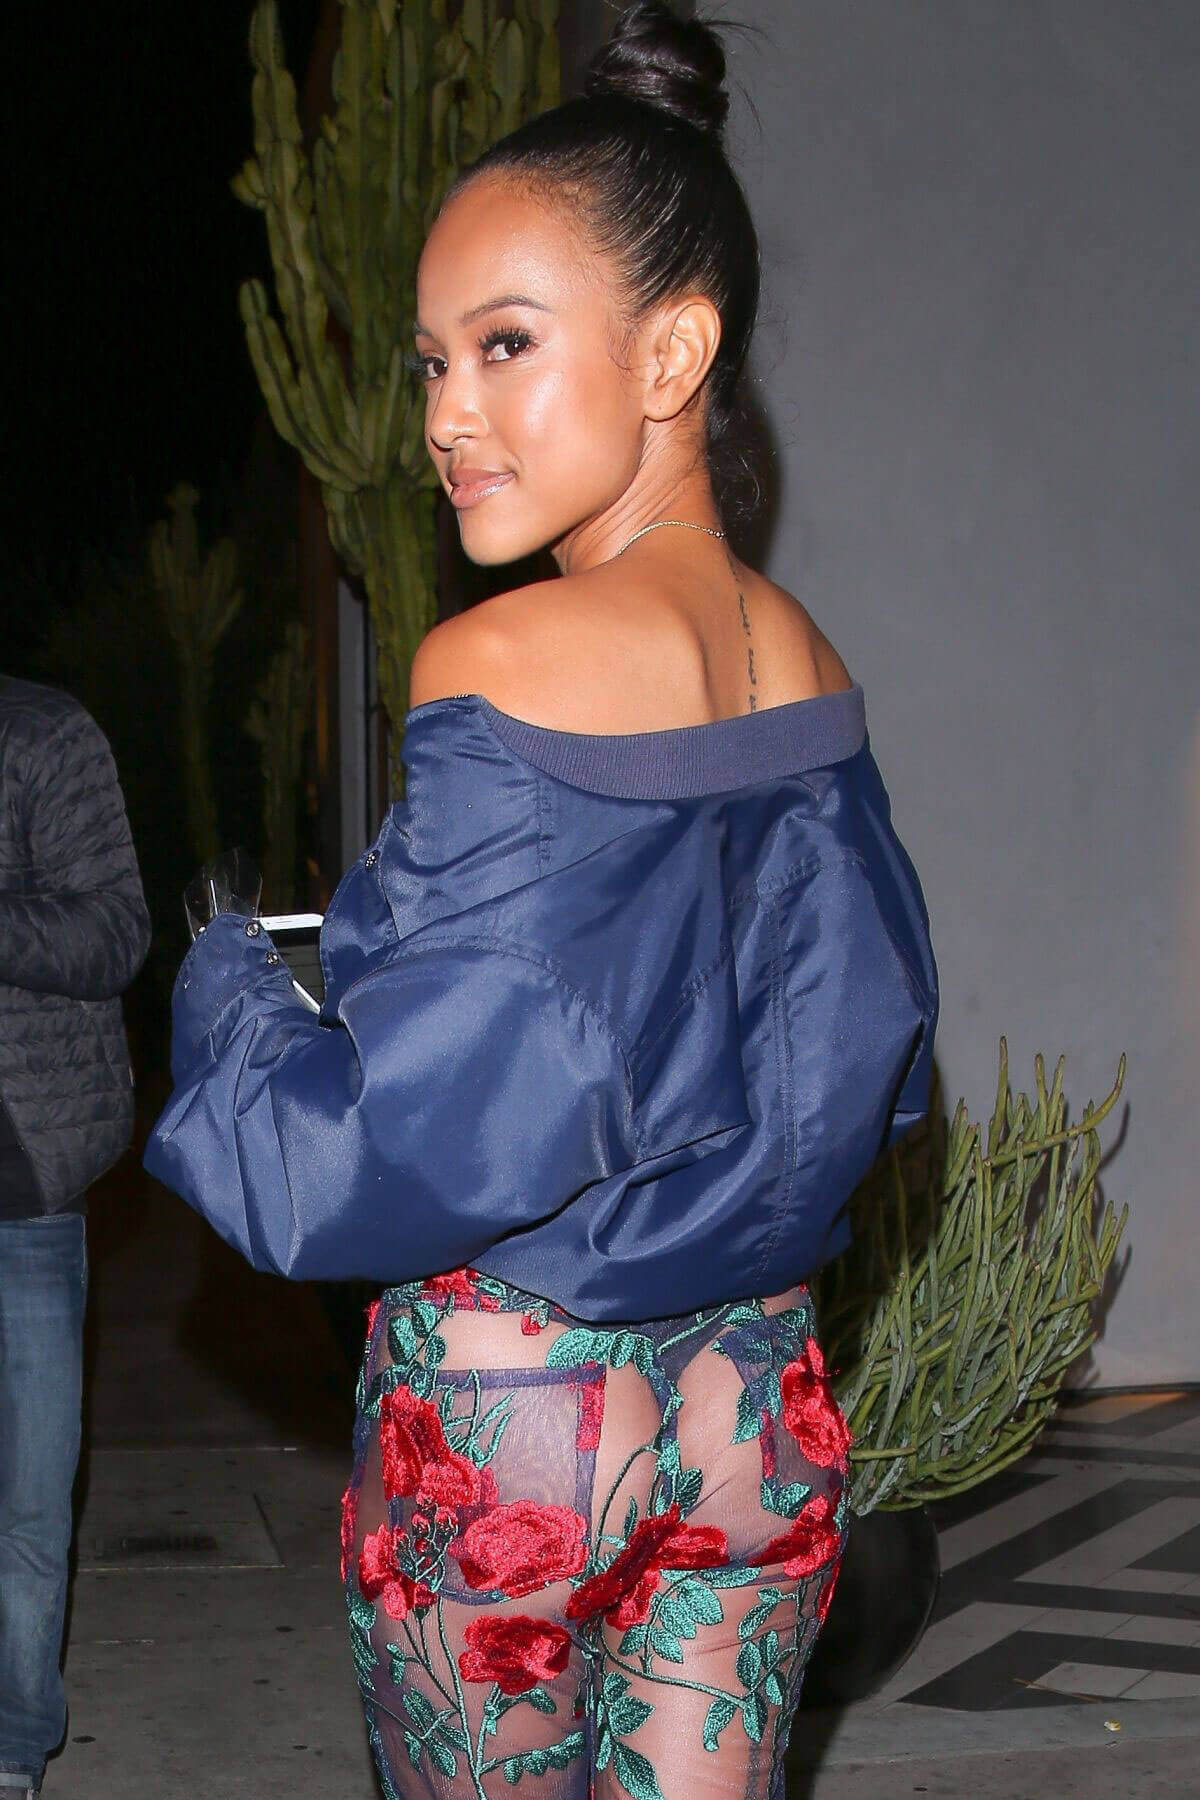 Karrueche Tran shows off Bum in Transparent Pants at Catch LA in West Hollywood